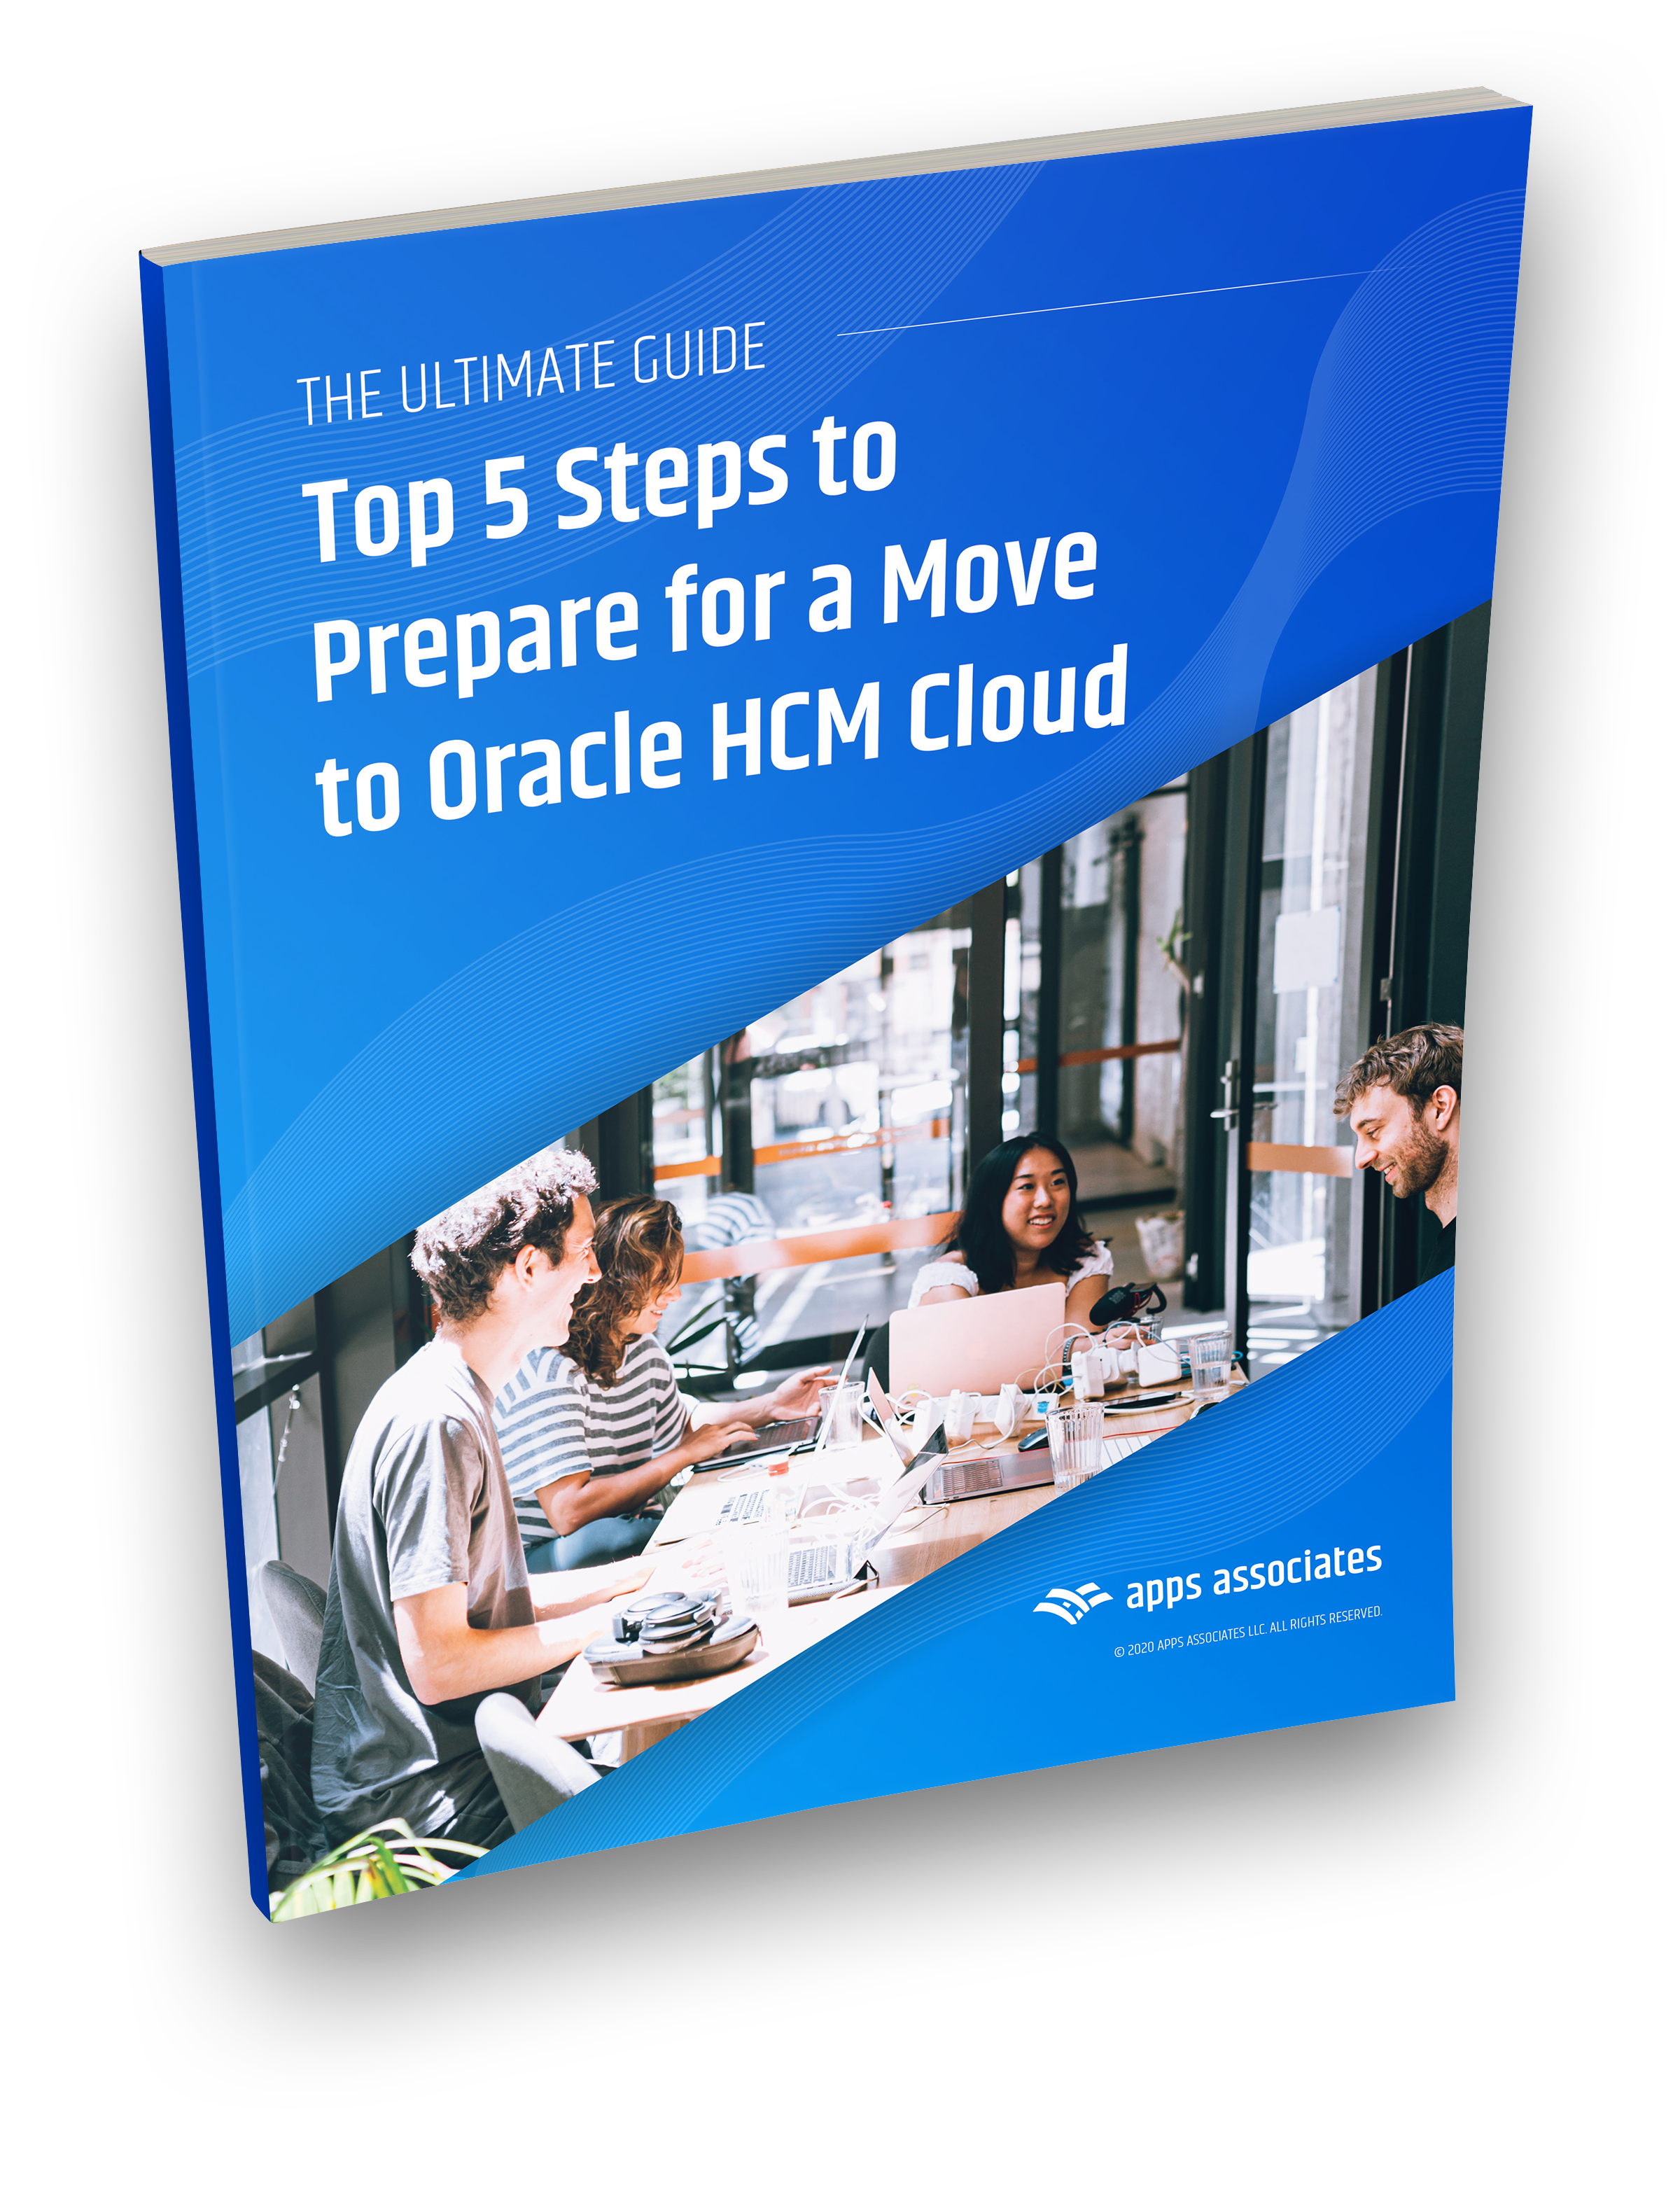 5 Steps to Prepare for a Move to Oracle HCM Cloud